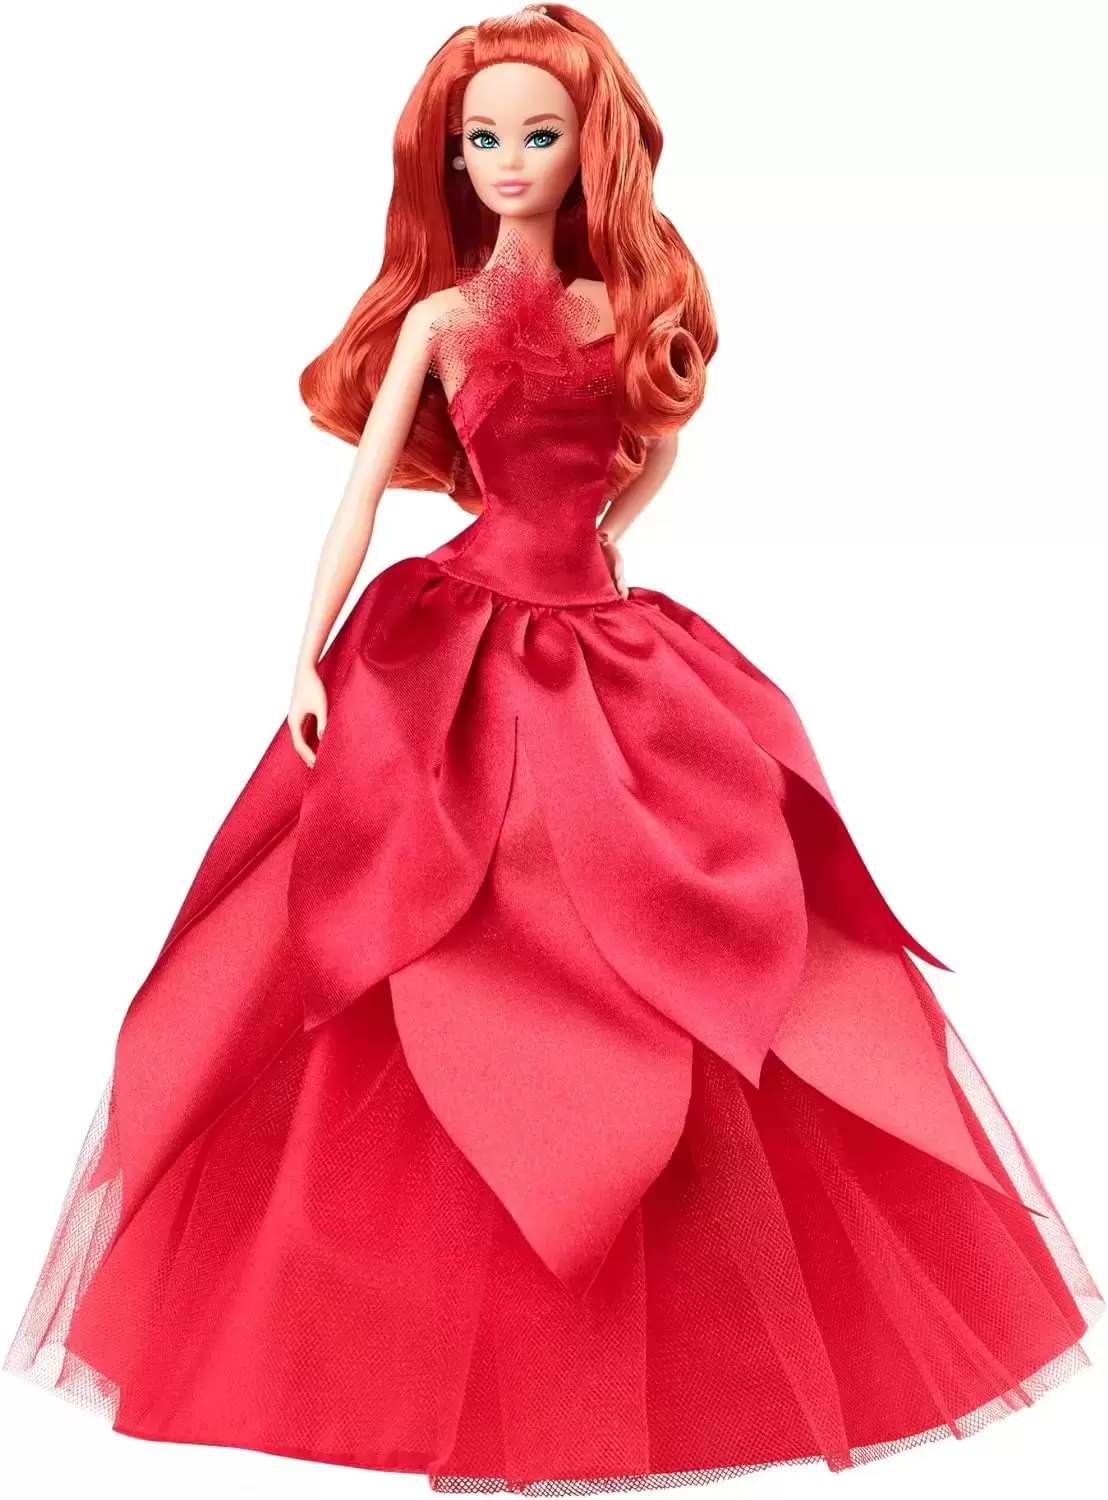 Barbie Holidays Collection - 2022 Holiday Barbie Doll, Red Hair